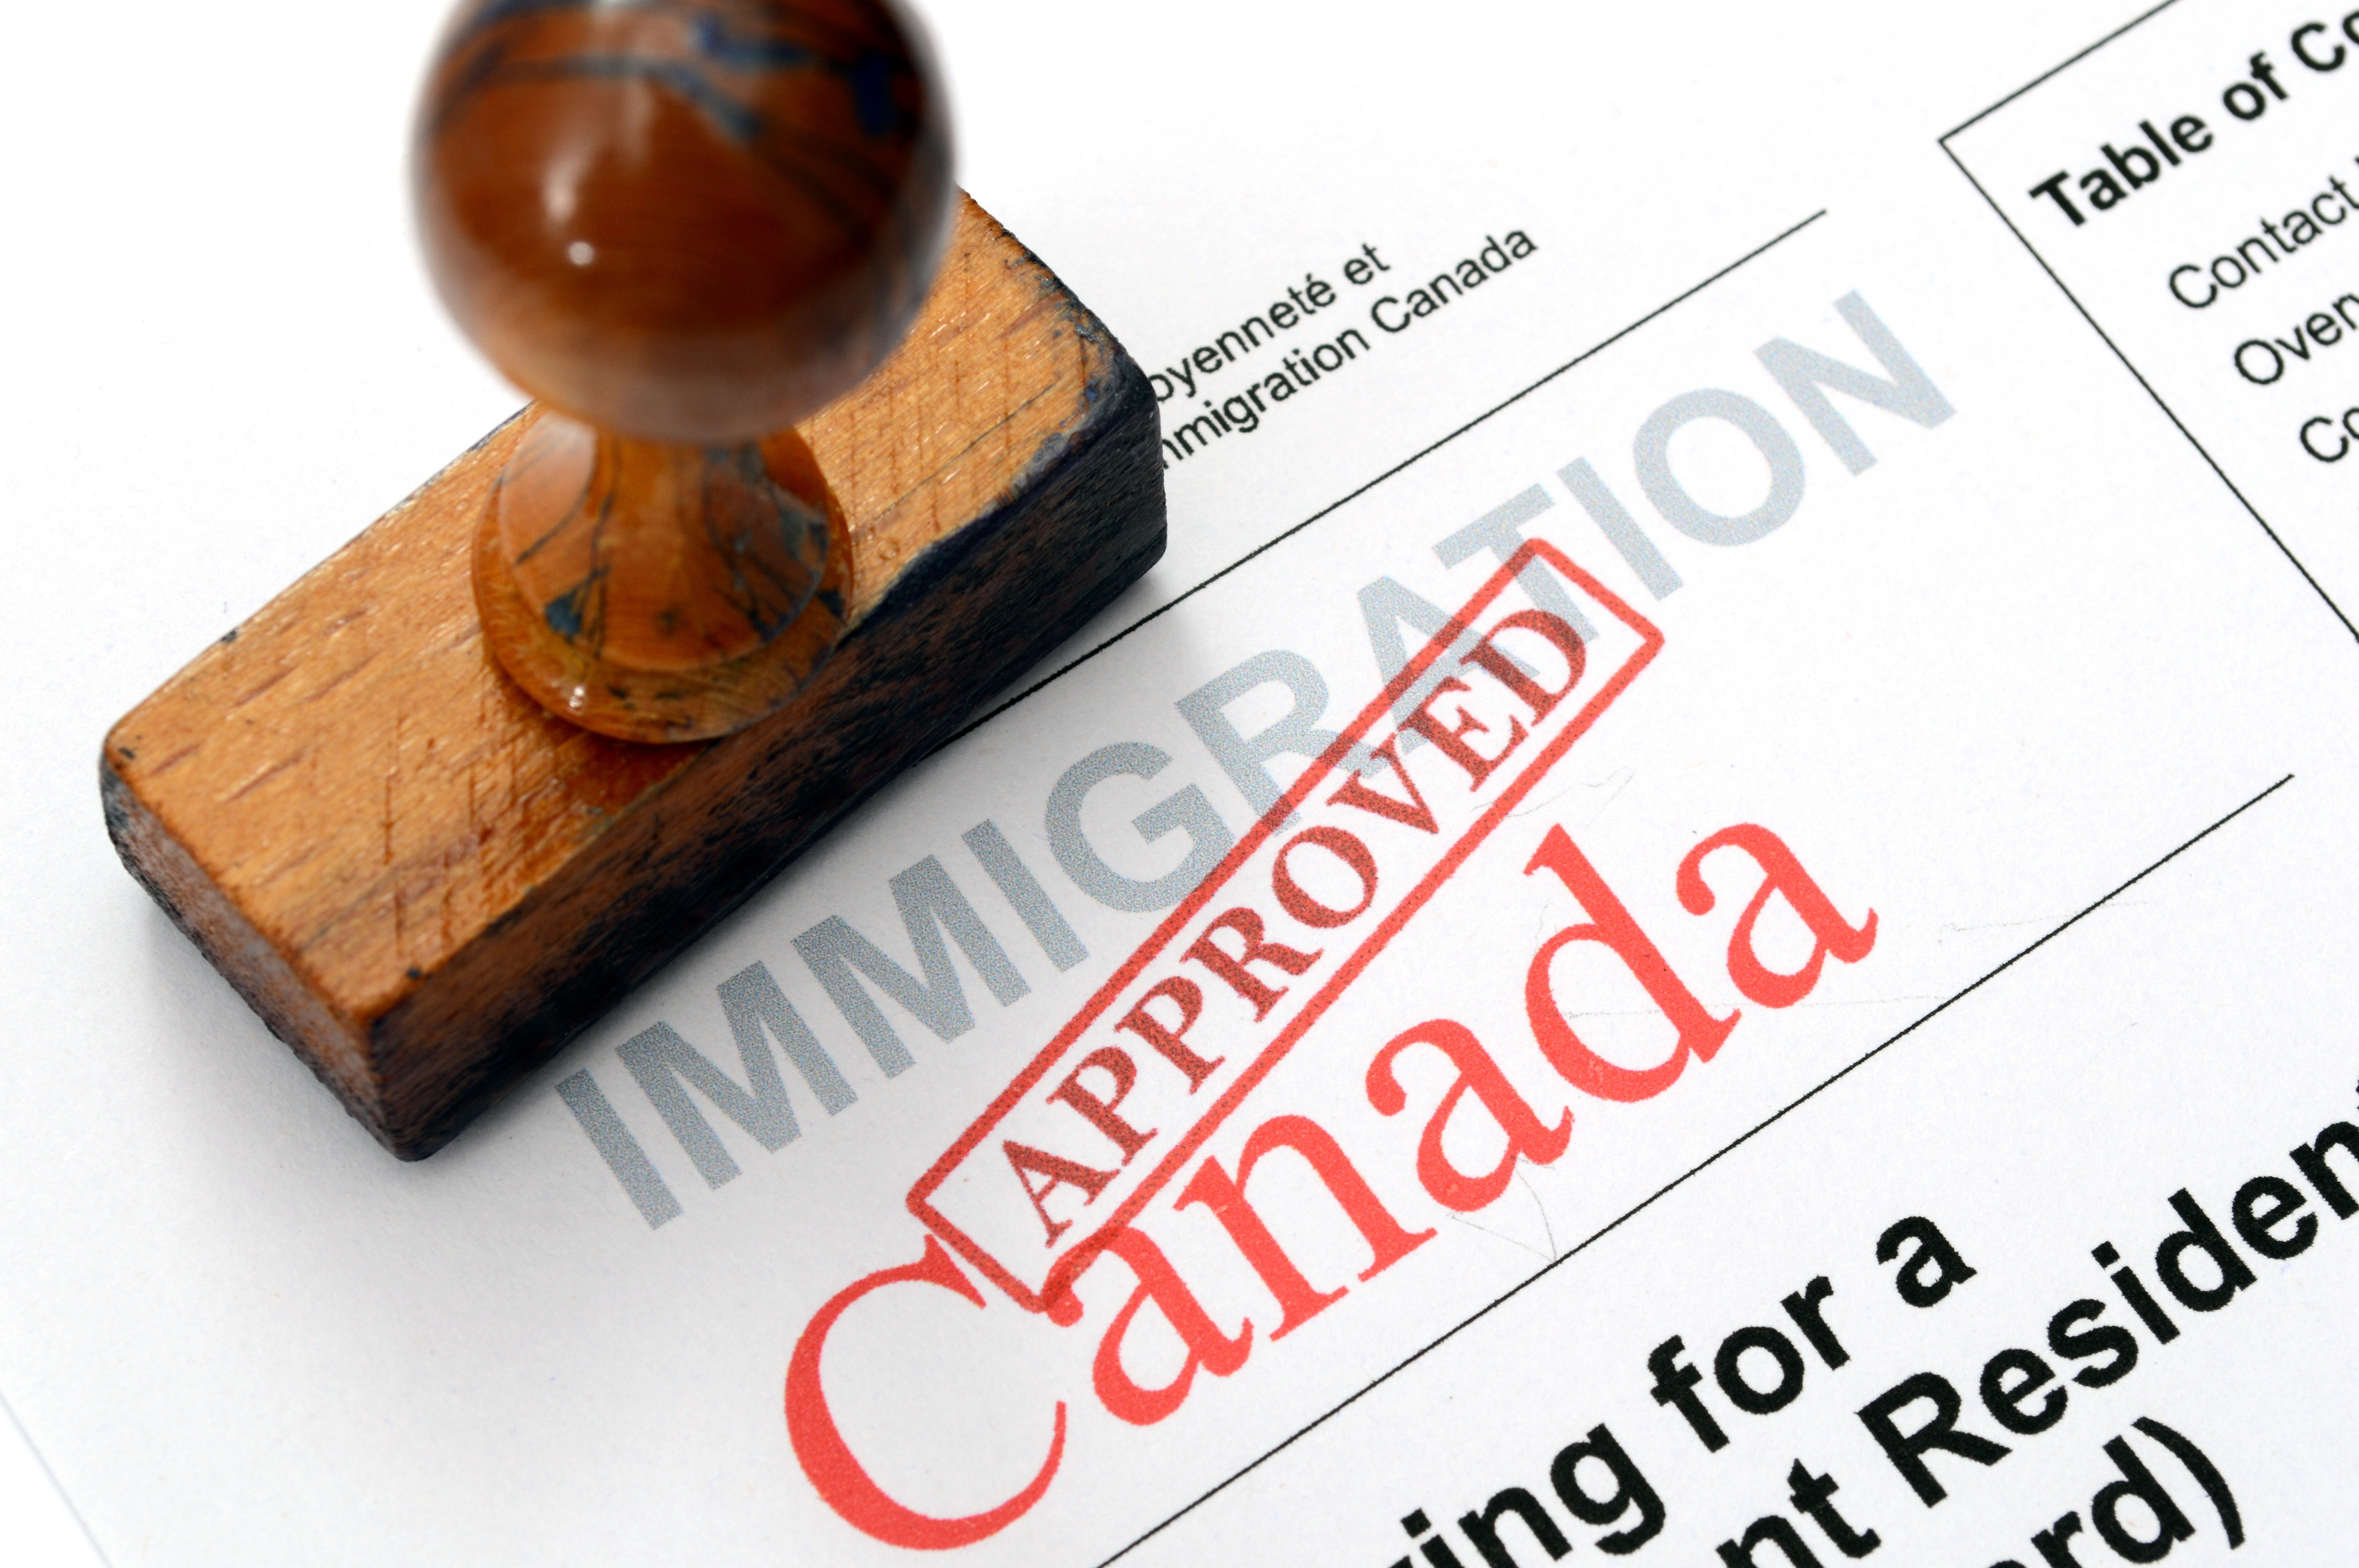 Why Canada needs immigrants: A new study answers the question